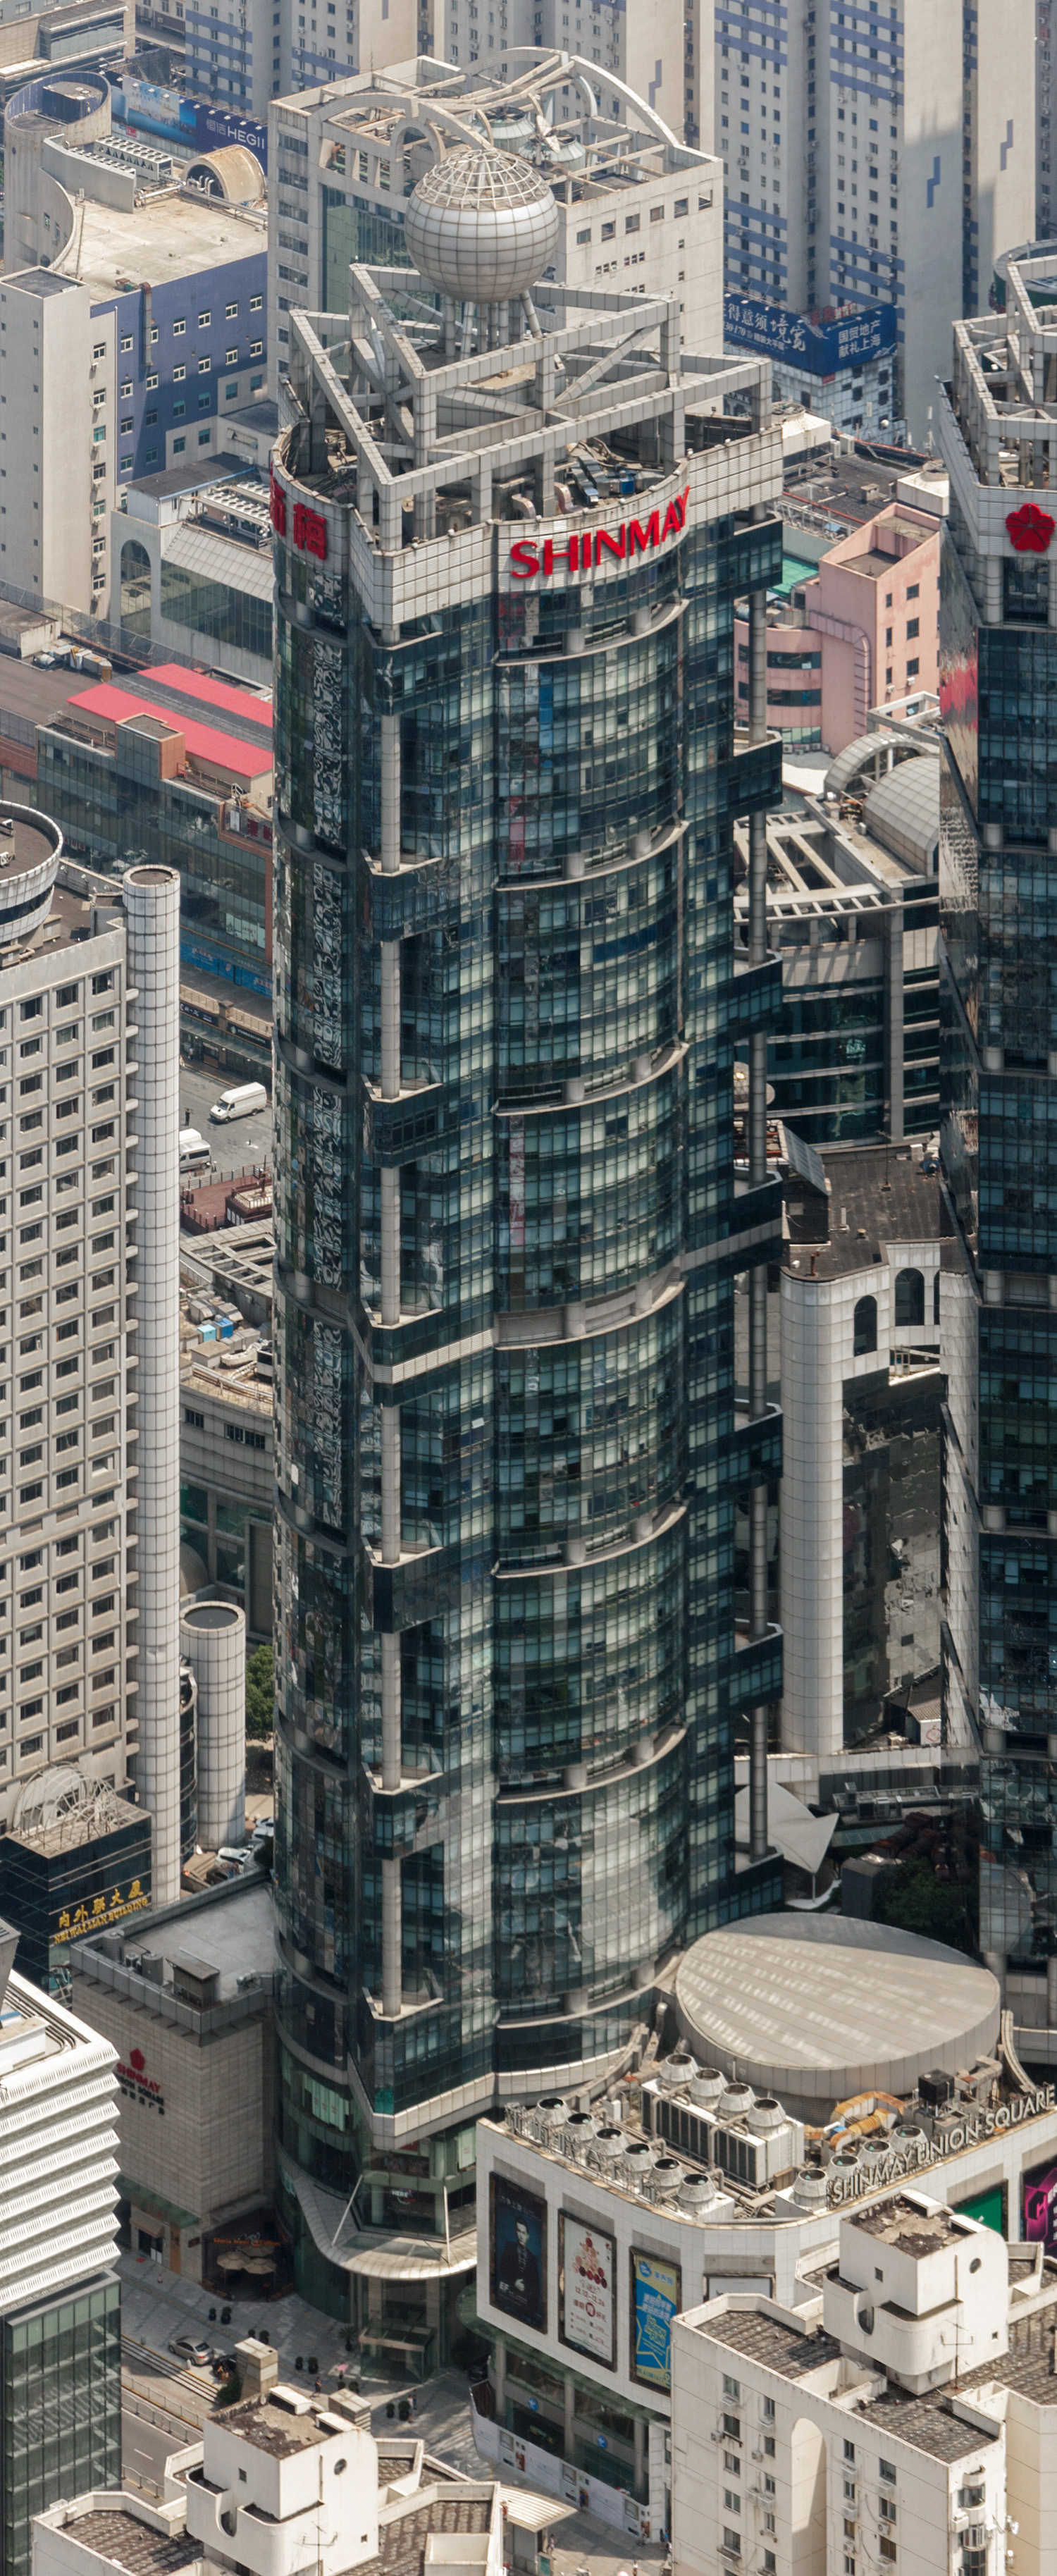 Shinmay Union Square Tower I, Shanghai - View from Shanghai Tower. © Mathias Beinling